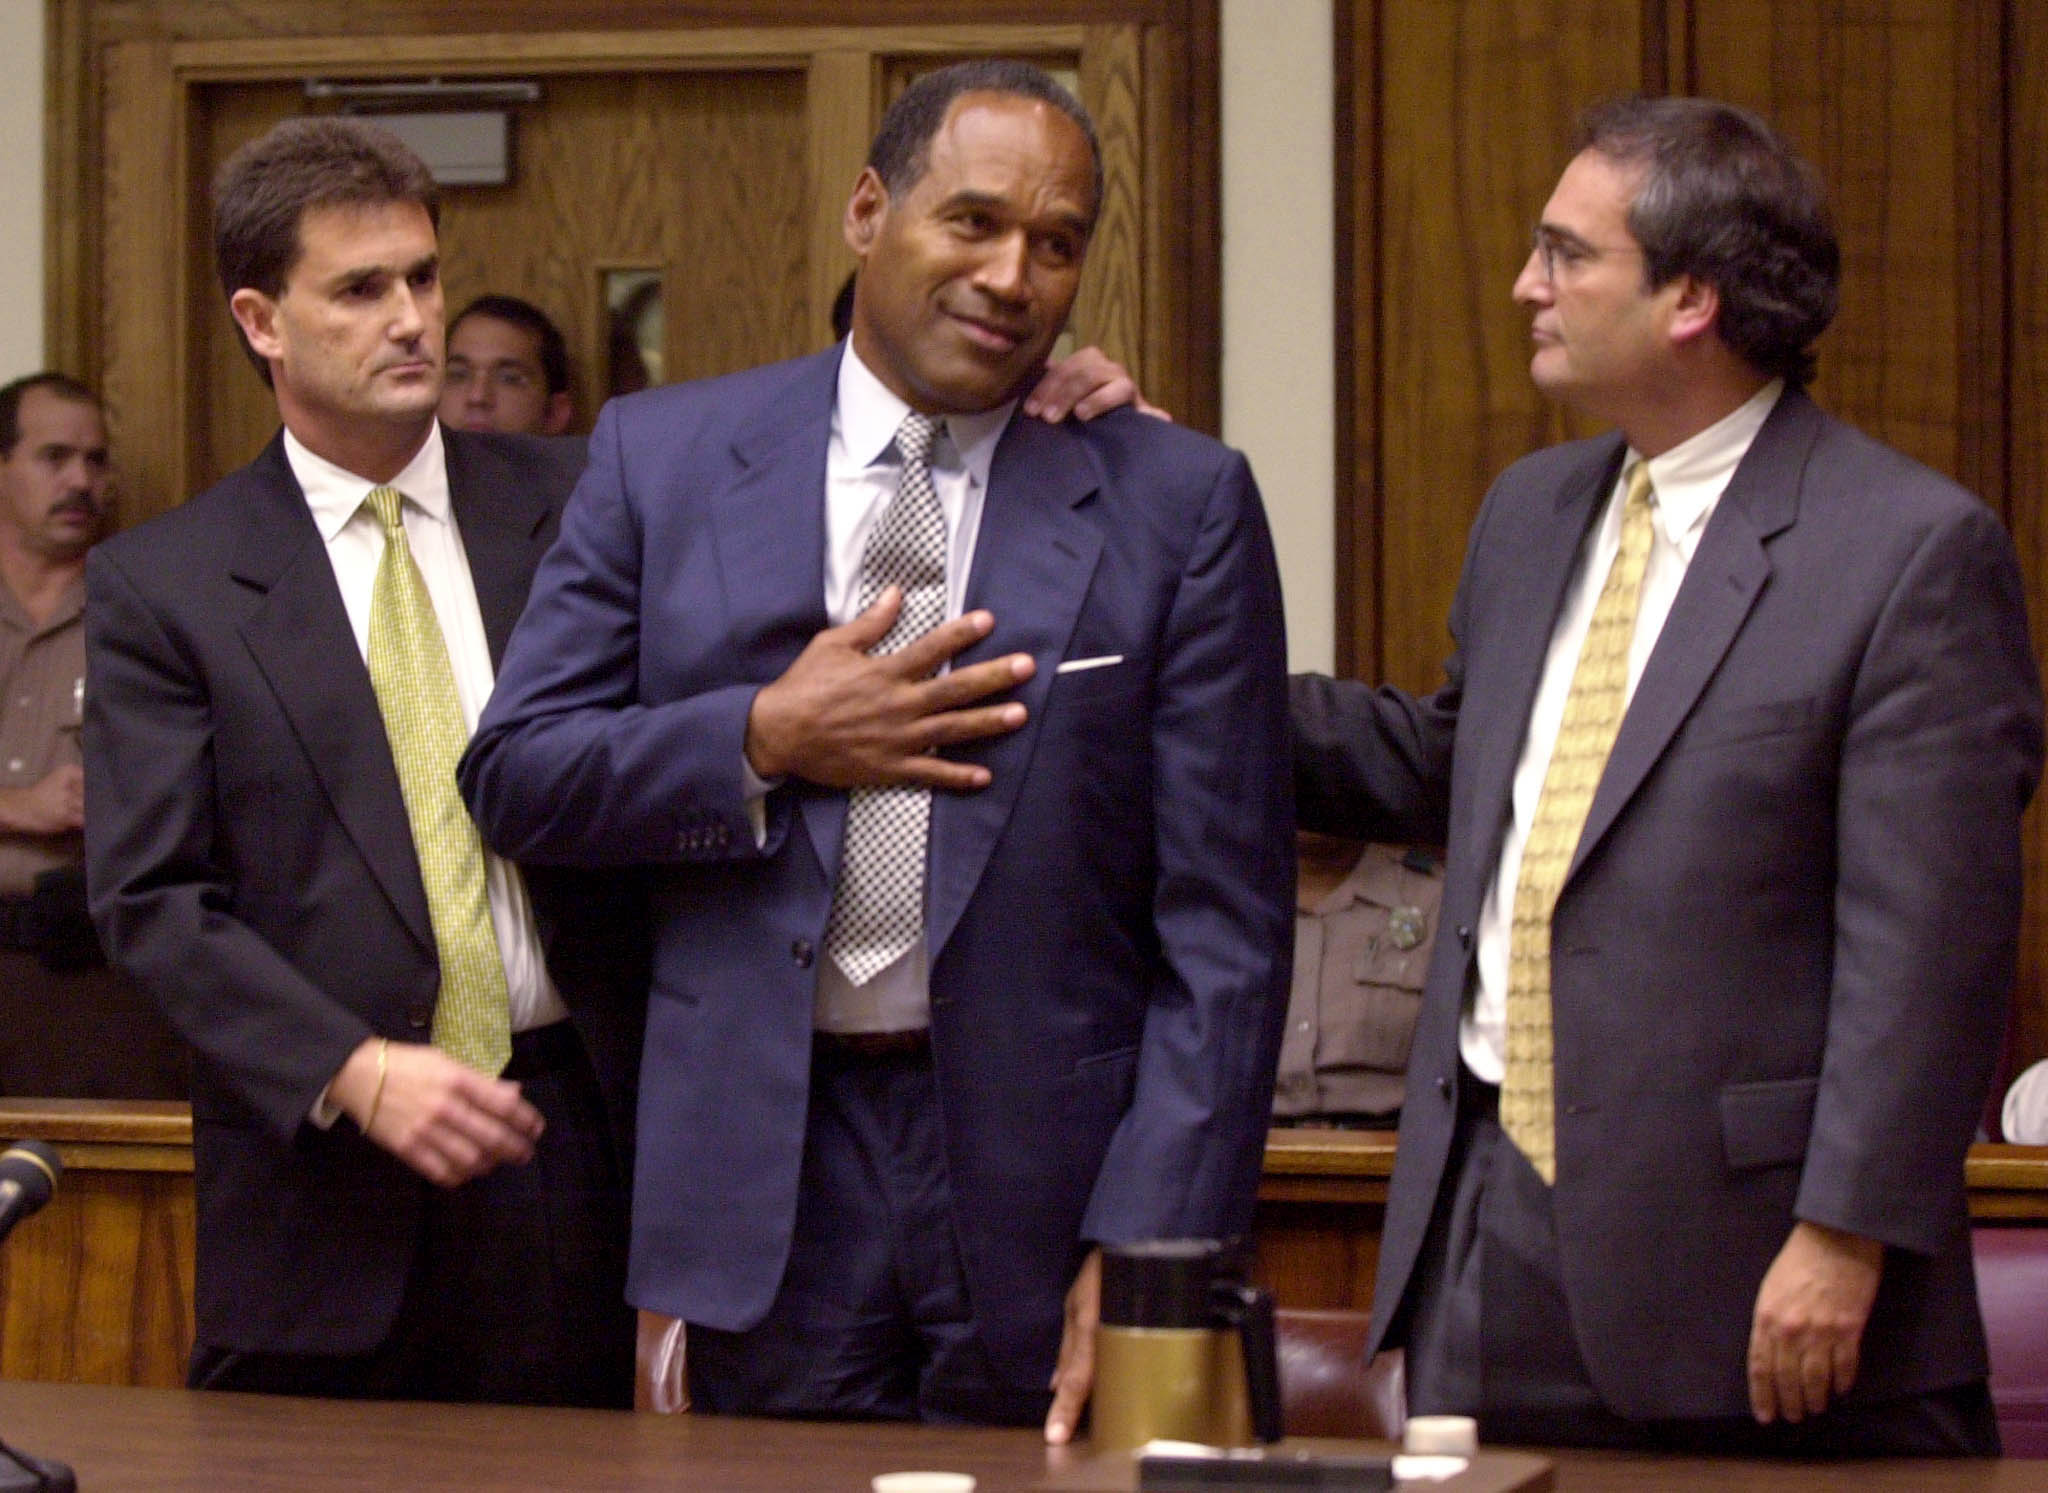 OJ SIMPSON REACTS WITH ATTORNEYS AFTER HEARING NOT GUILTY VERDICT.